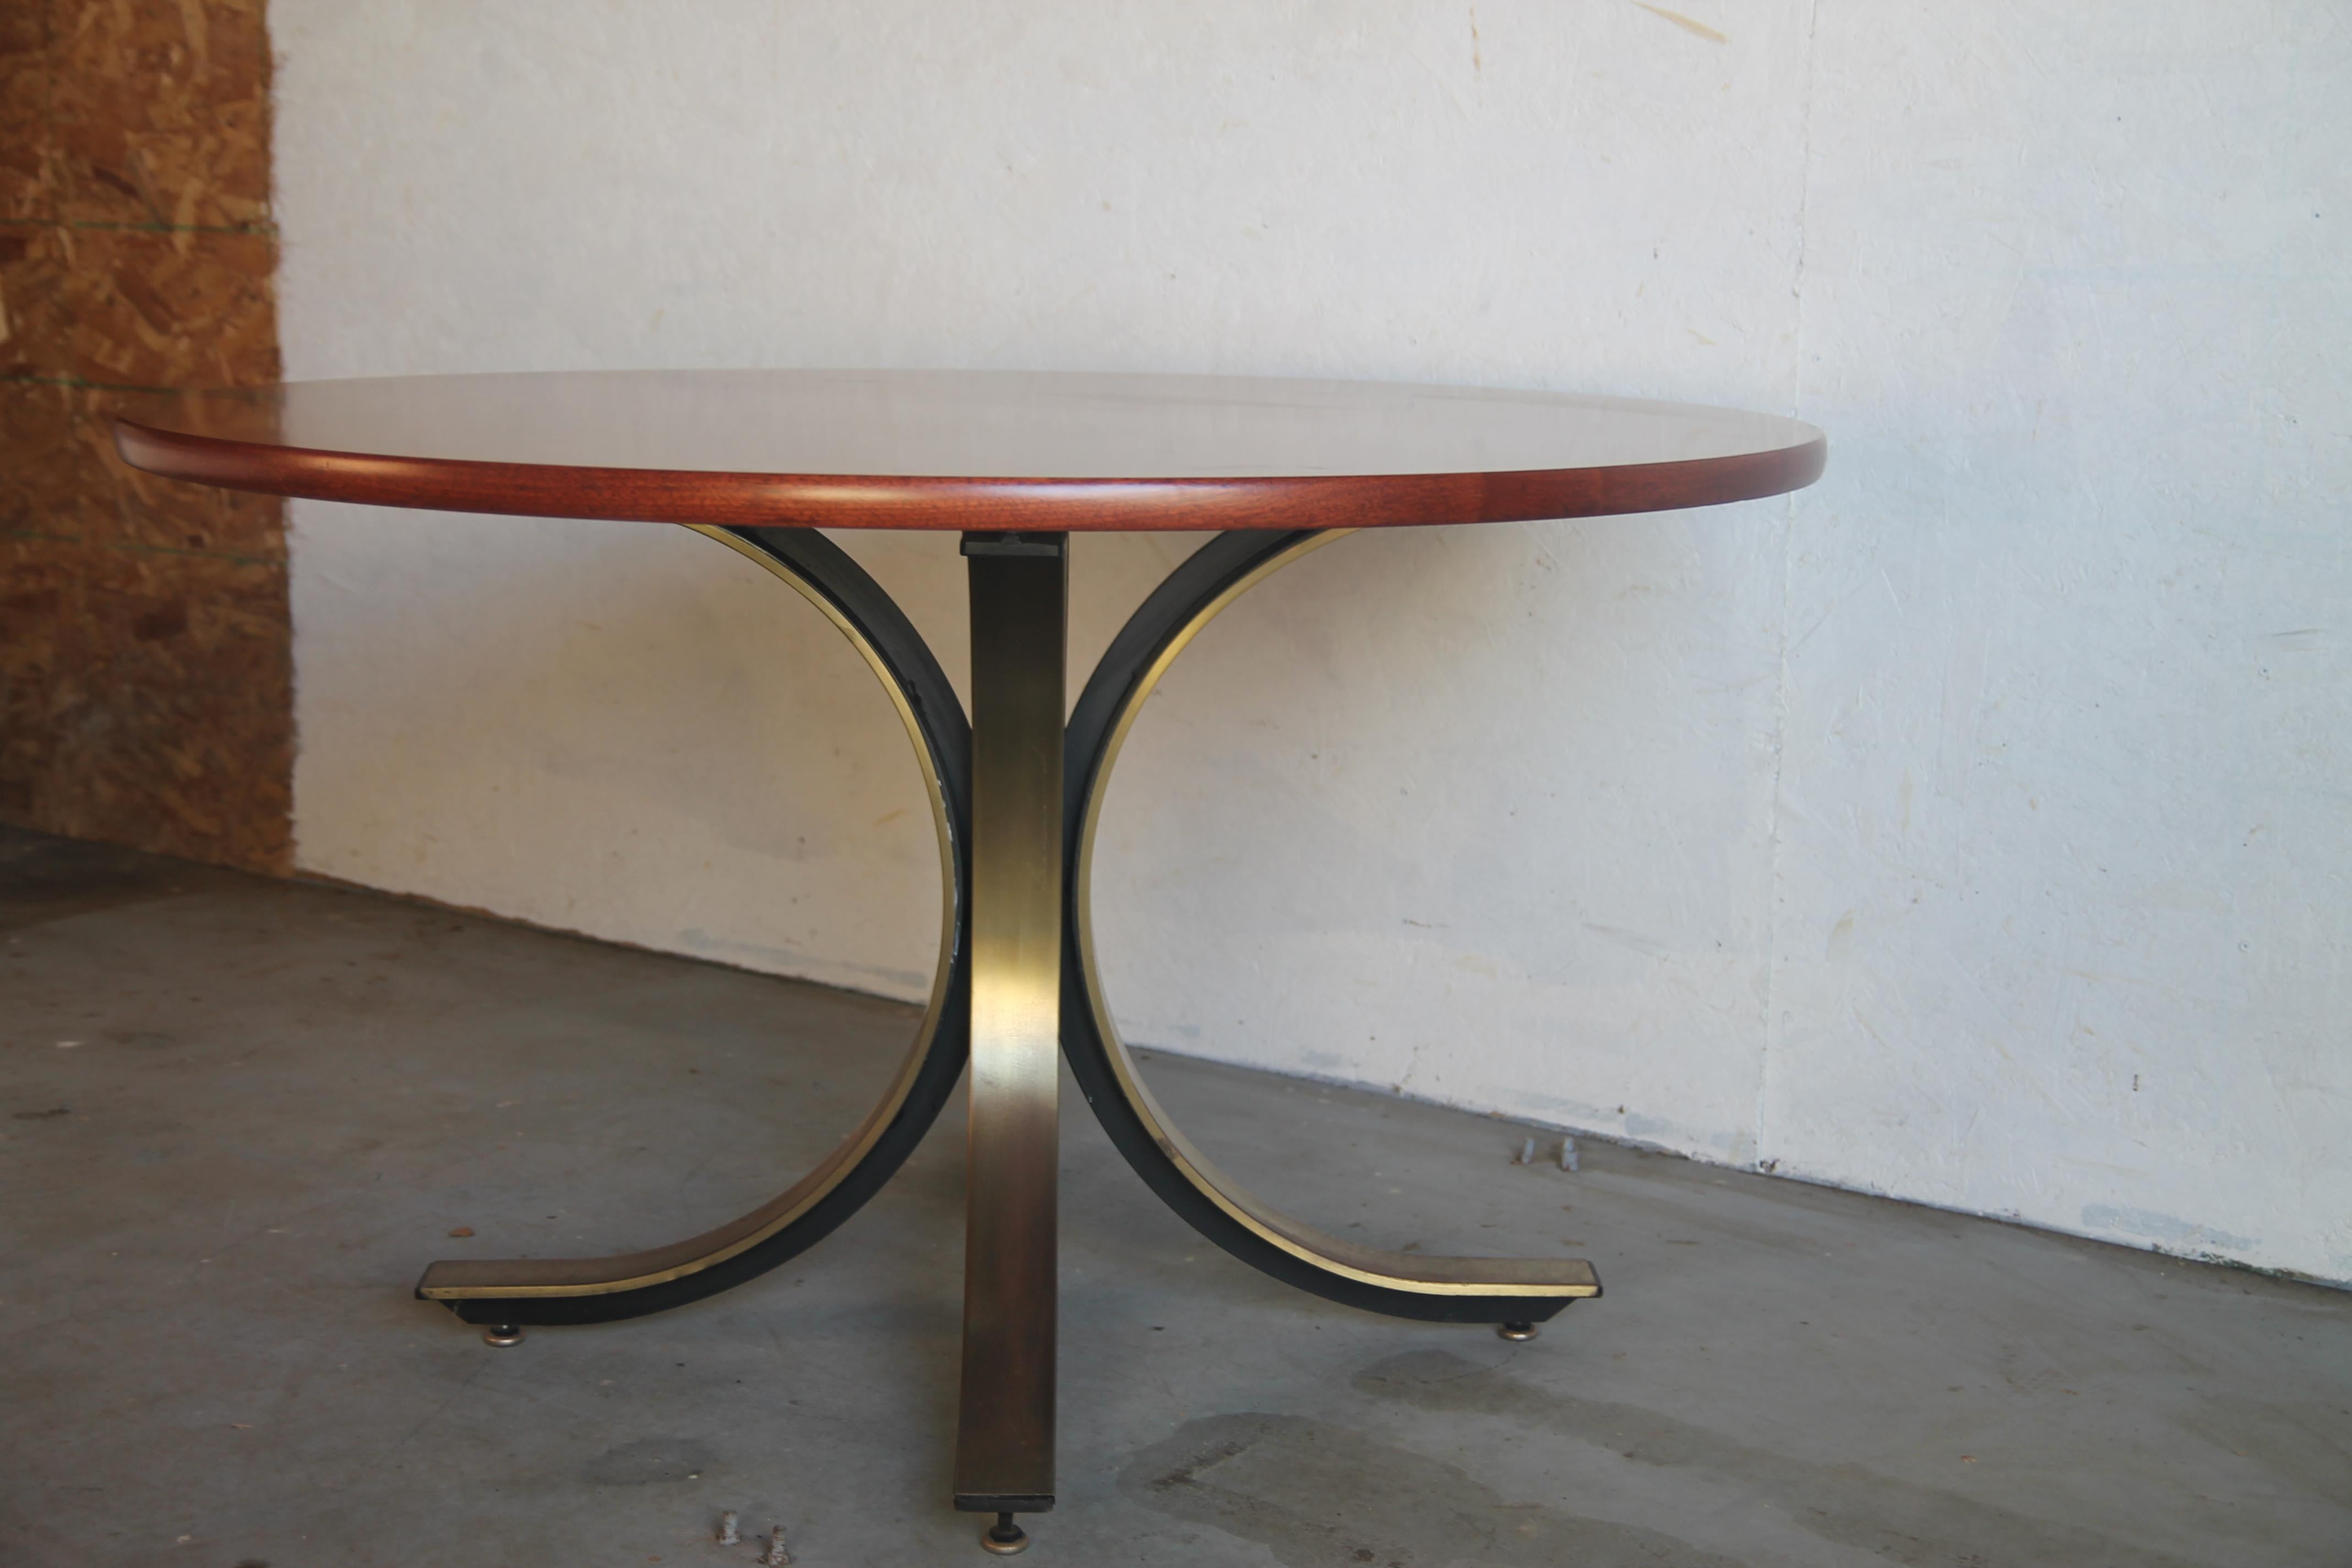 American Round Walnut Top with Brass-Plated Base Table by Stow Davis